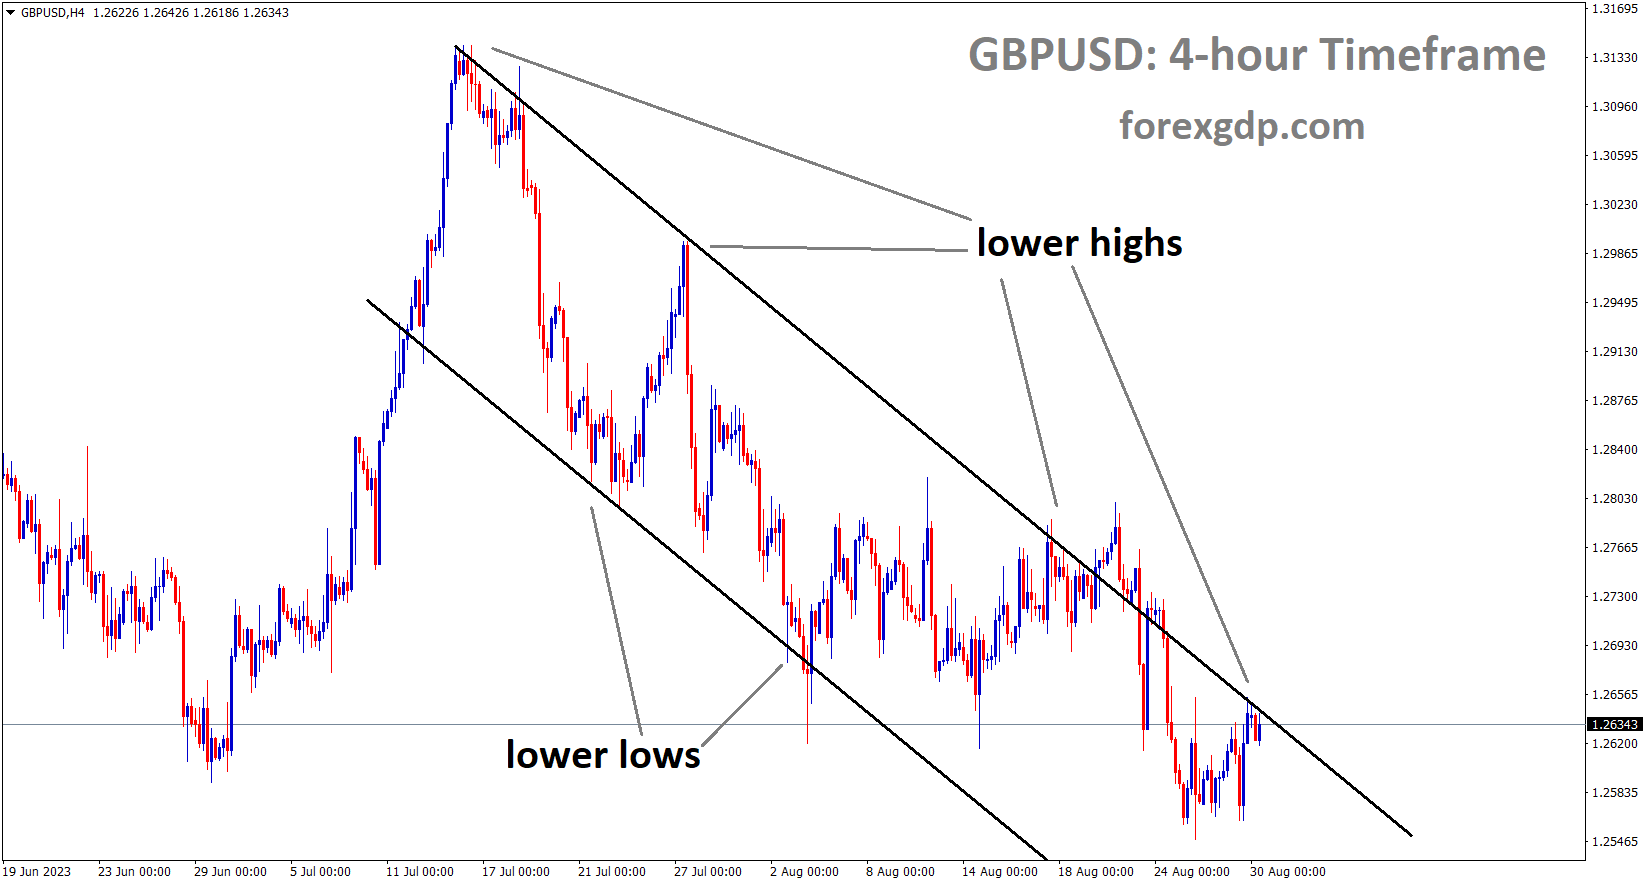 GBPUSD is moving in the Descending channel and the market has reached the lower high area of the channel